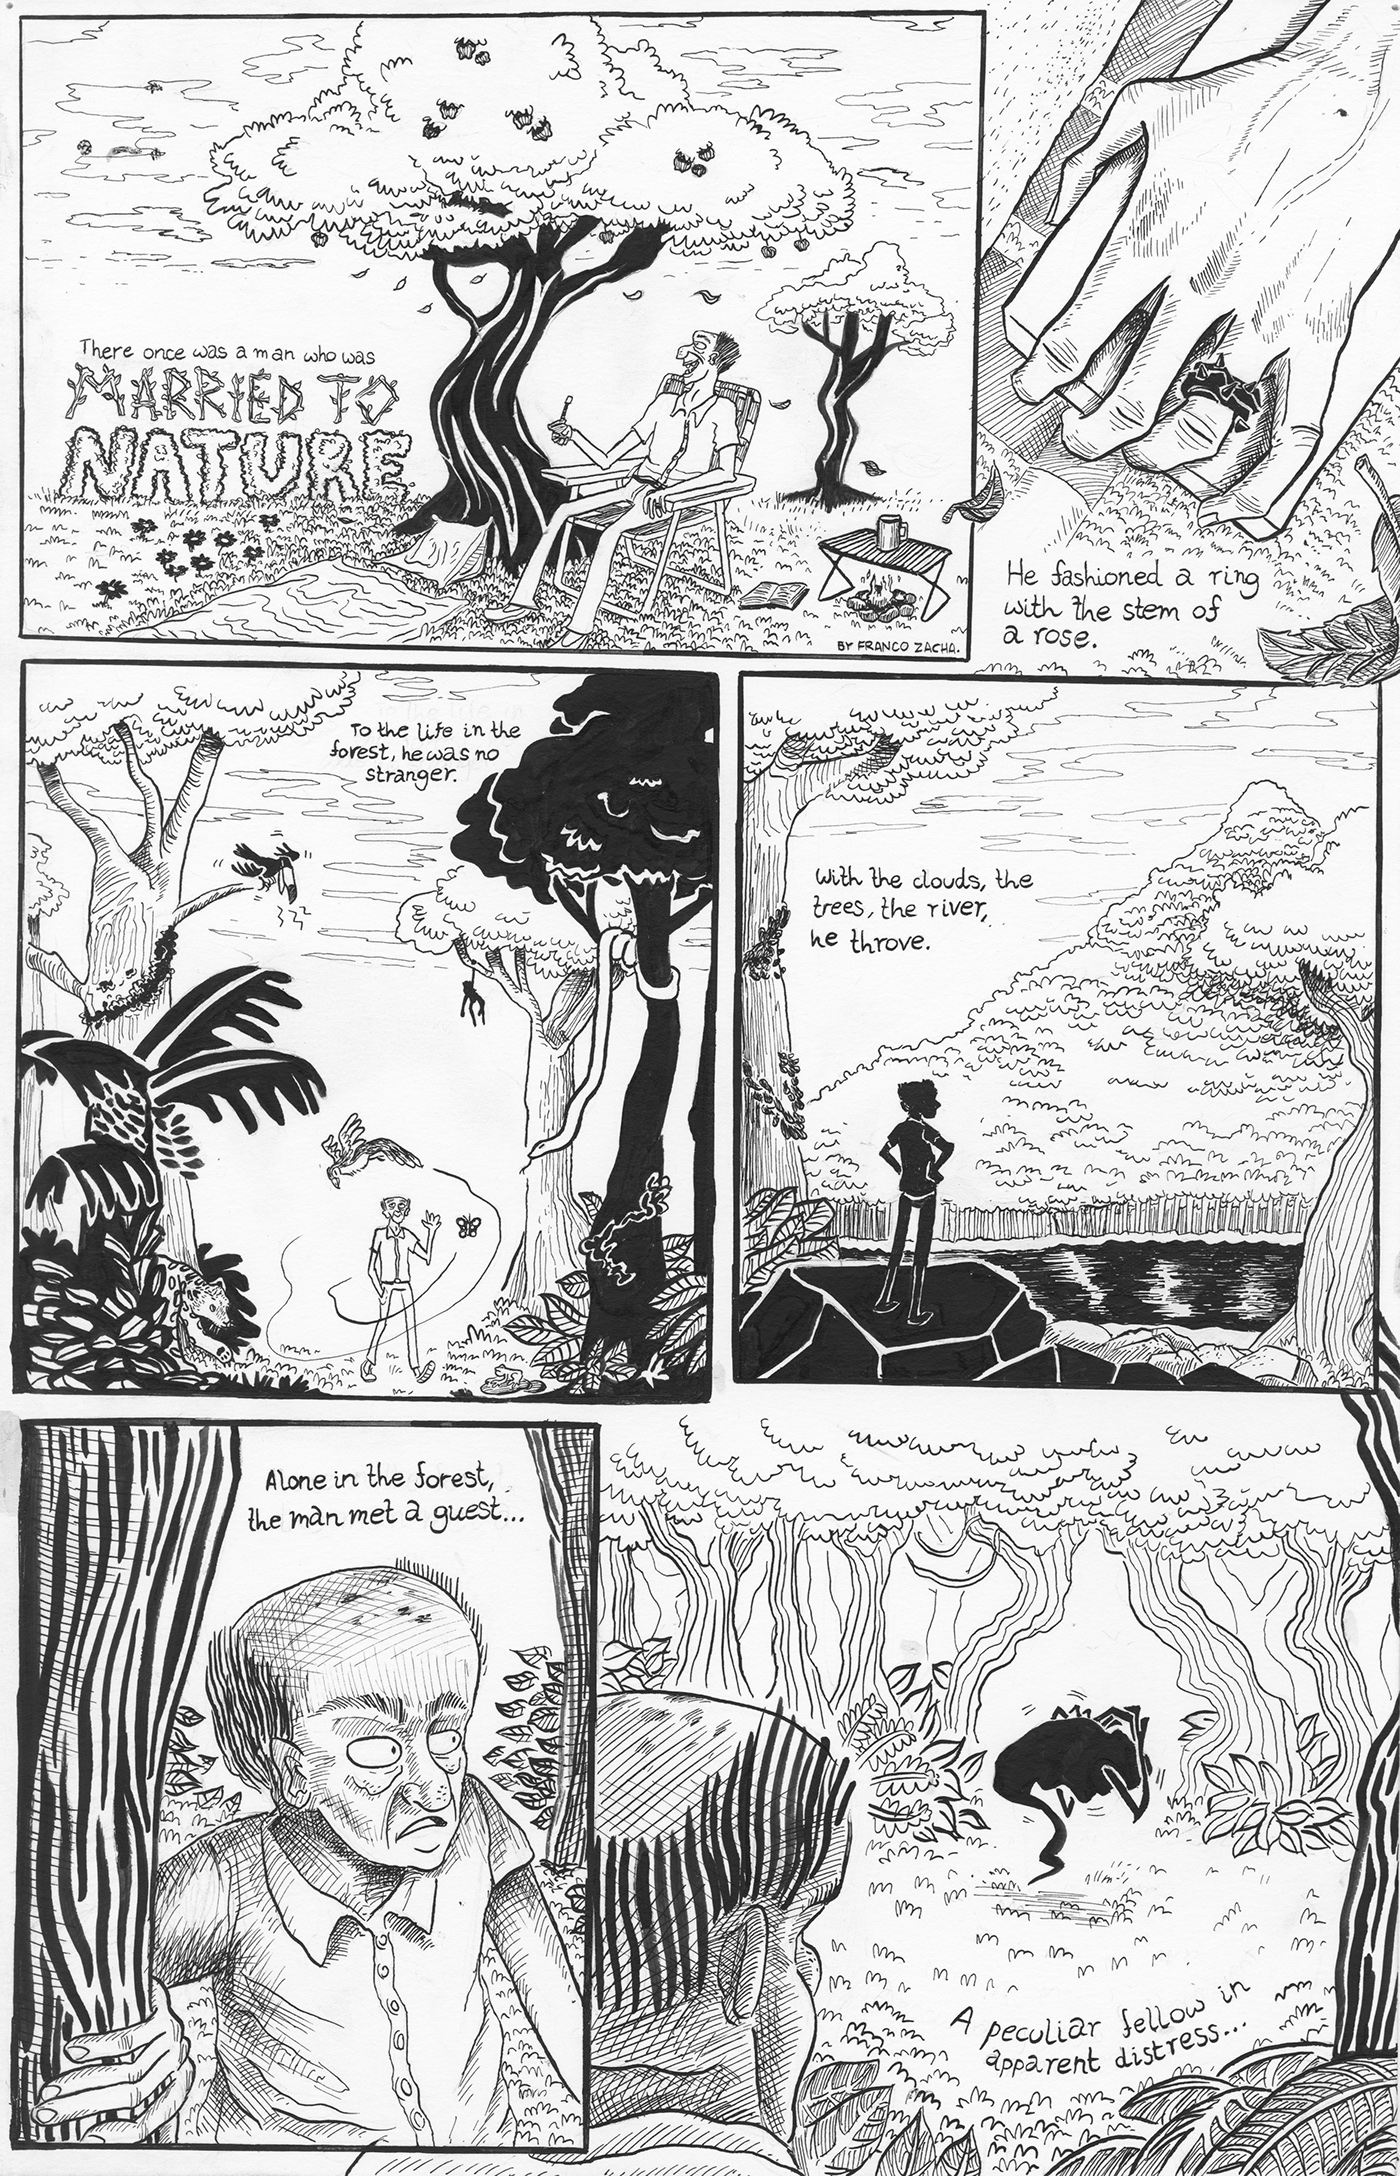 "Married to Nature" - Comics Assignment on Behance